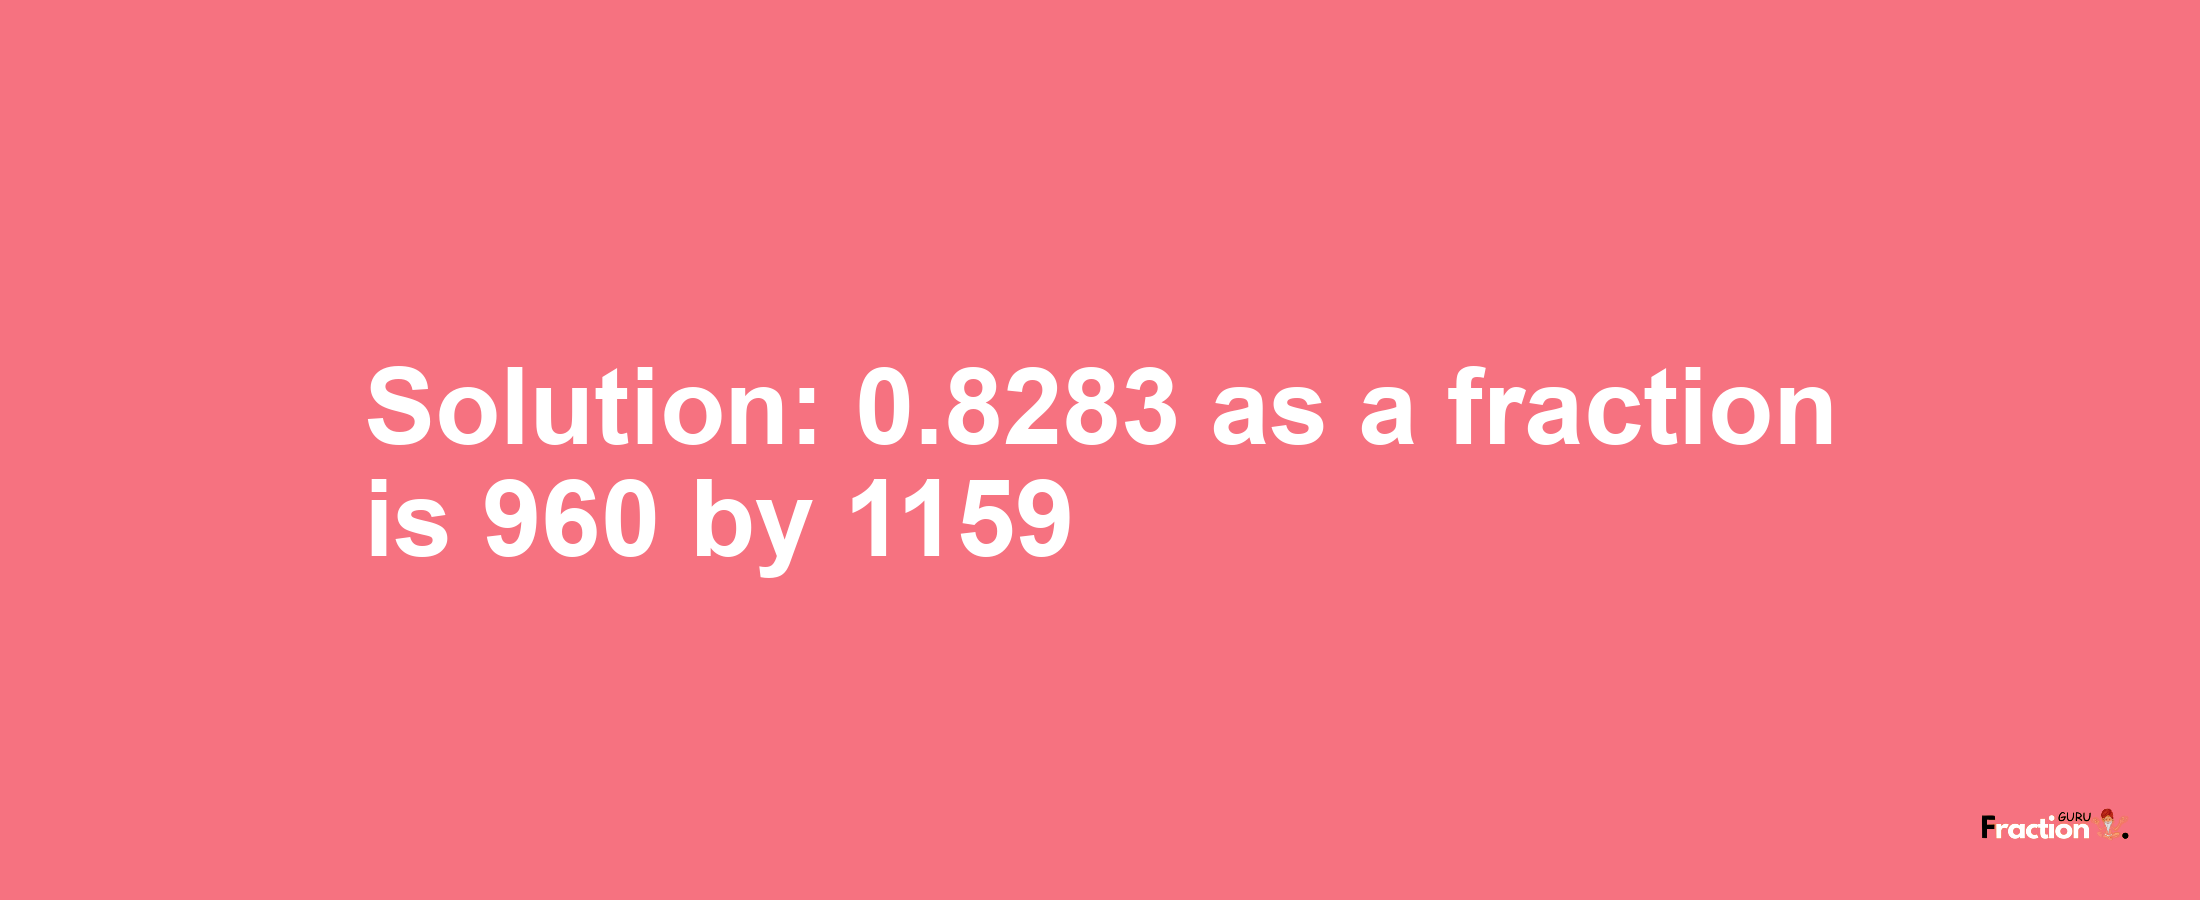 Solution:0.8283 as a fraction is 960/1159